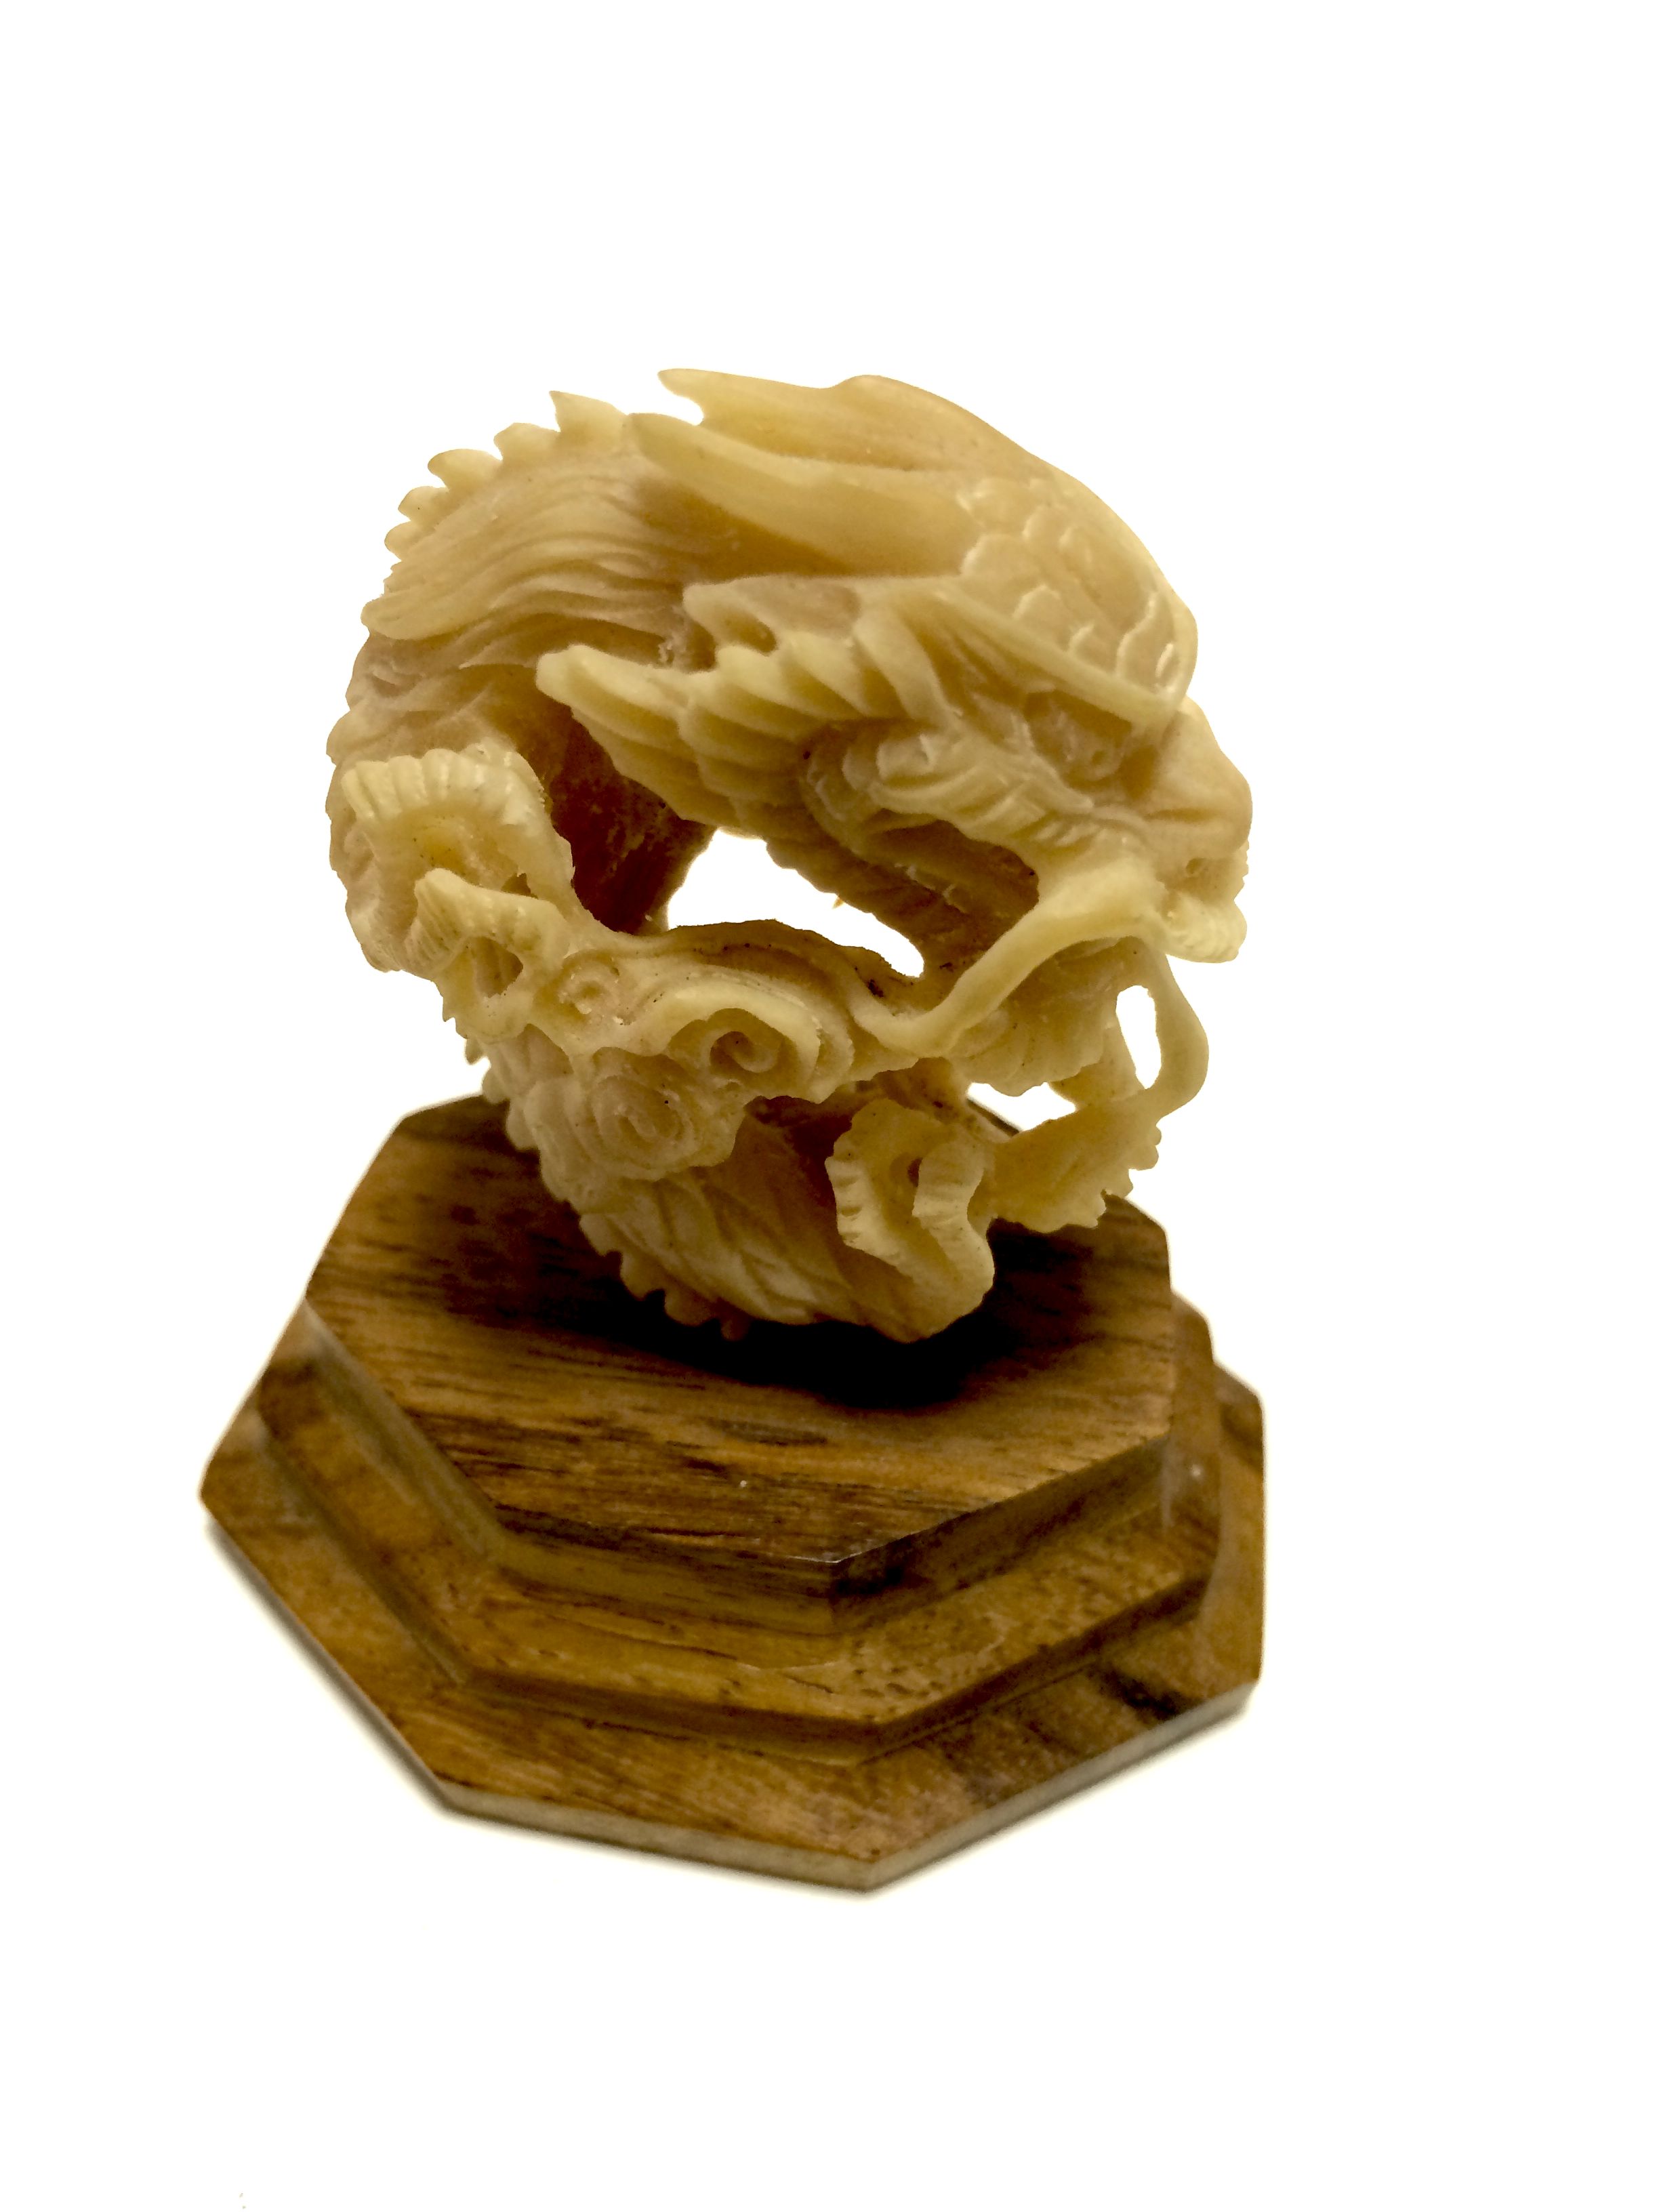 Handmade ornate Balinese dragon carved from a nut. Originating from from South Asia where it was